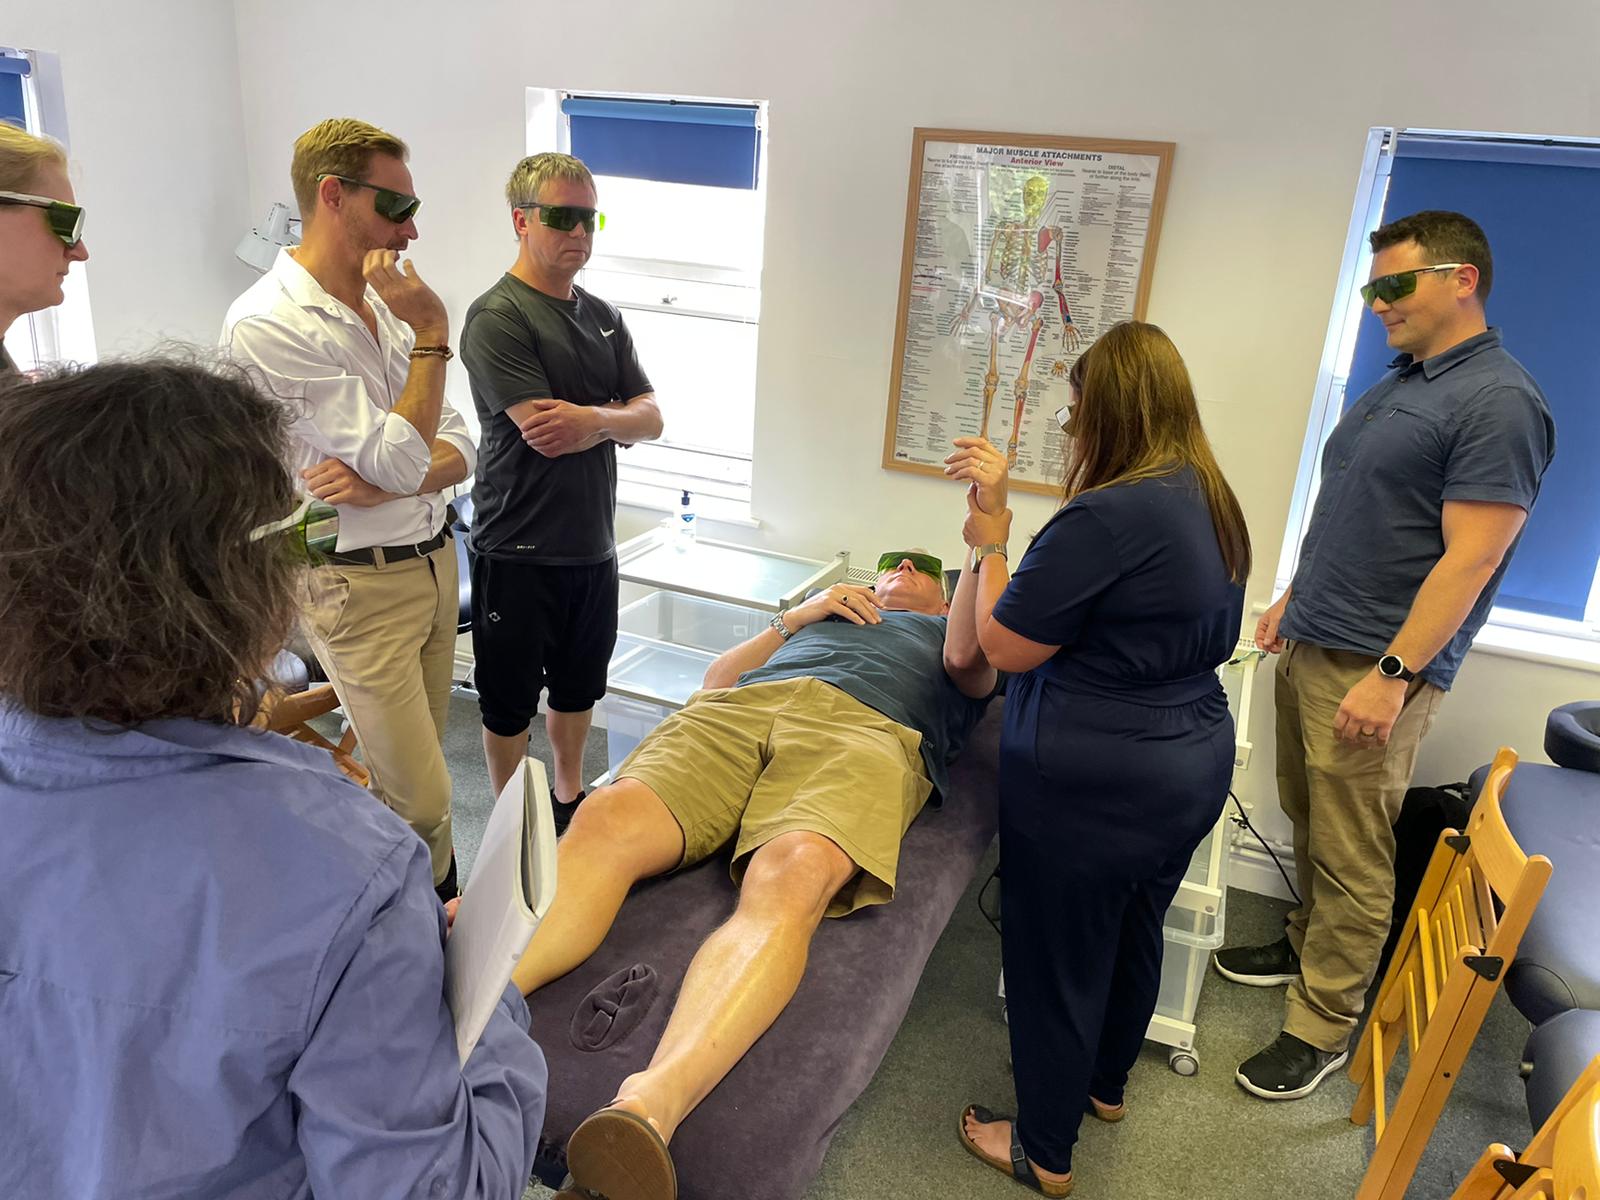 MLS laser therapy training - Patrick Cane CORE Oxford